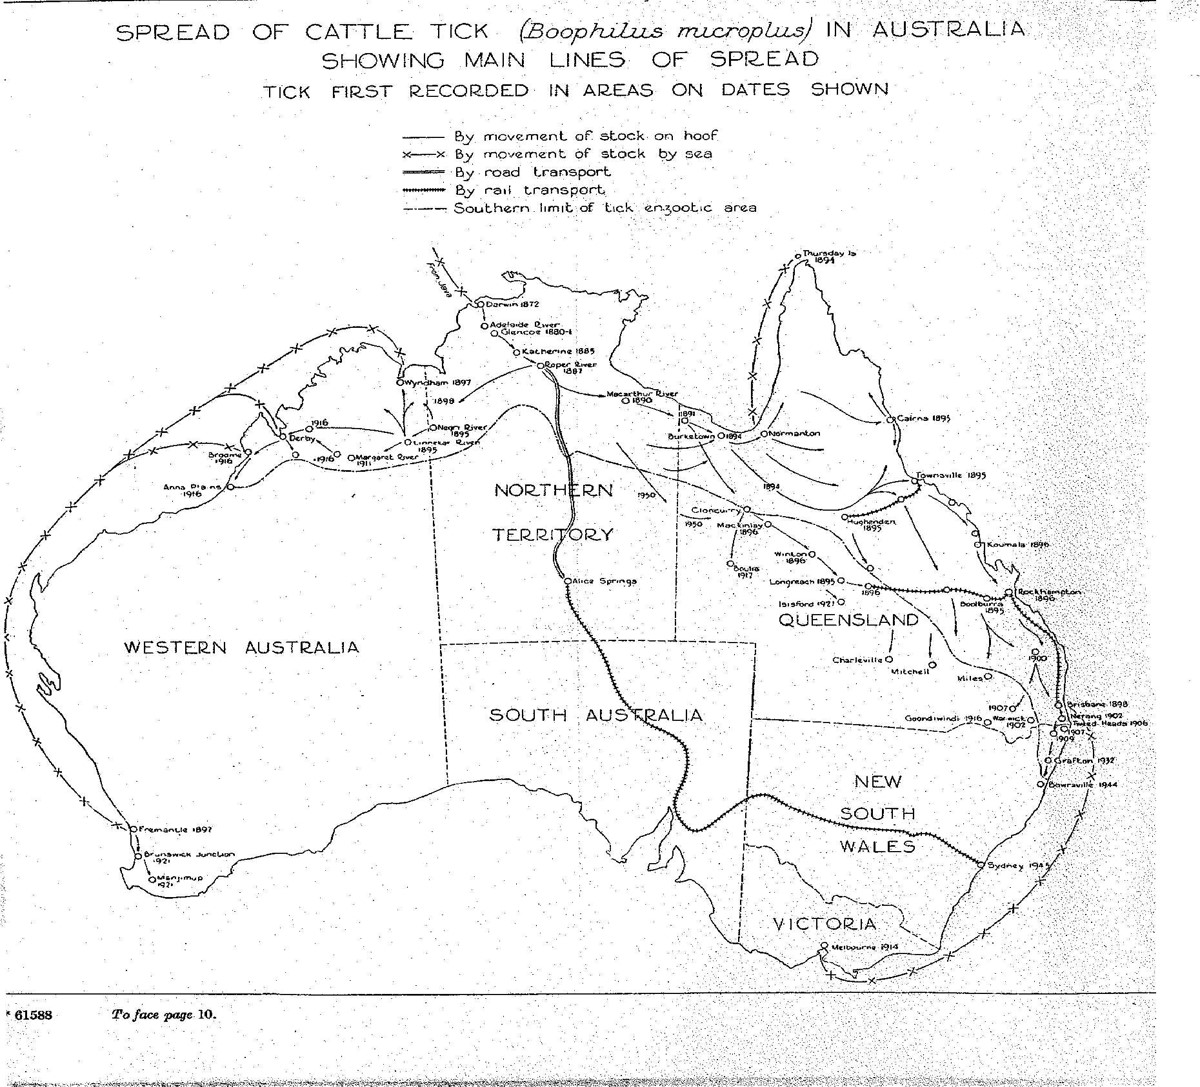 Map showing the spread of catte tick in Australia (dates shown)